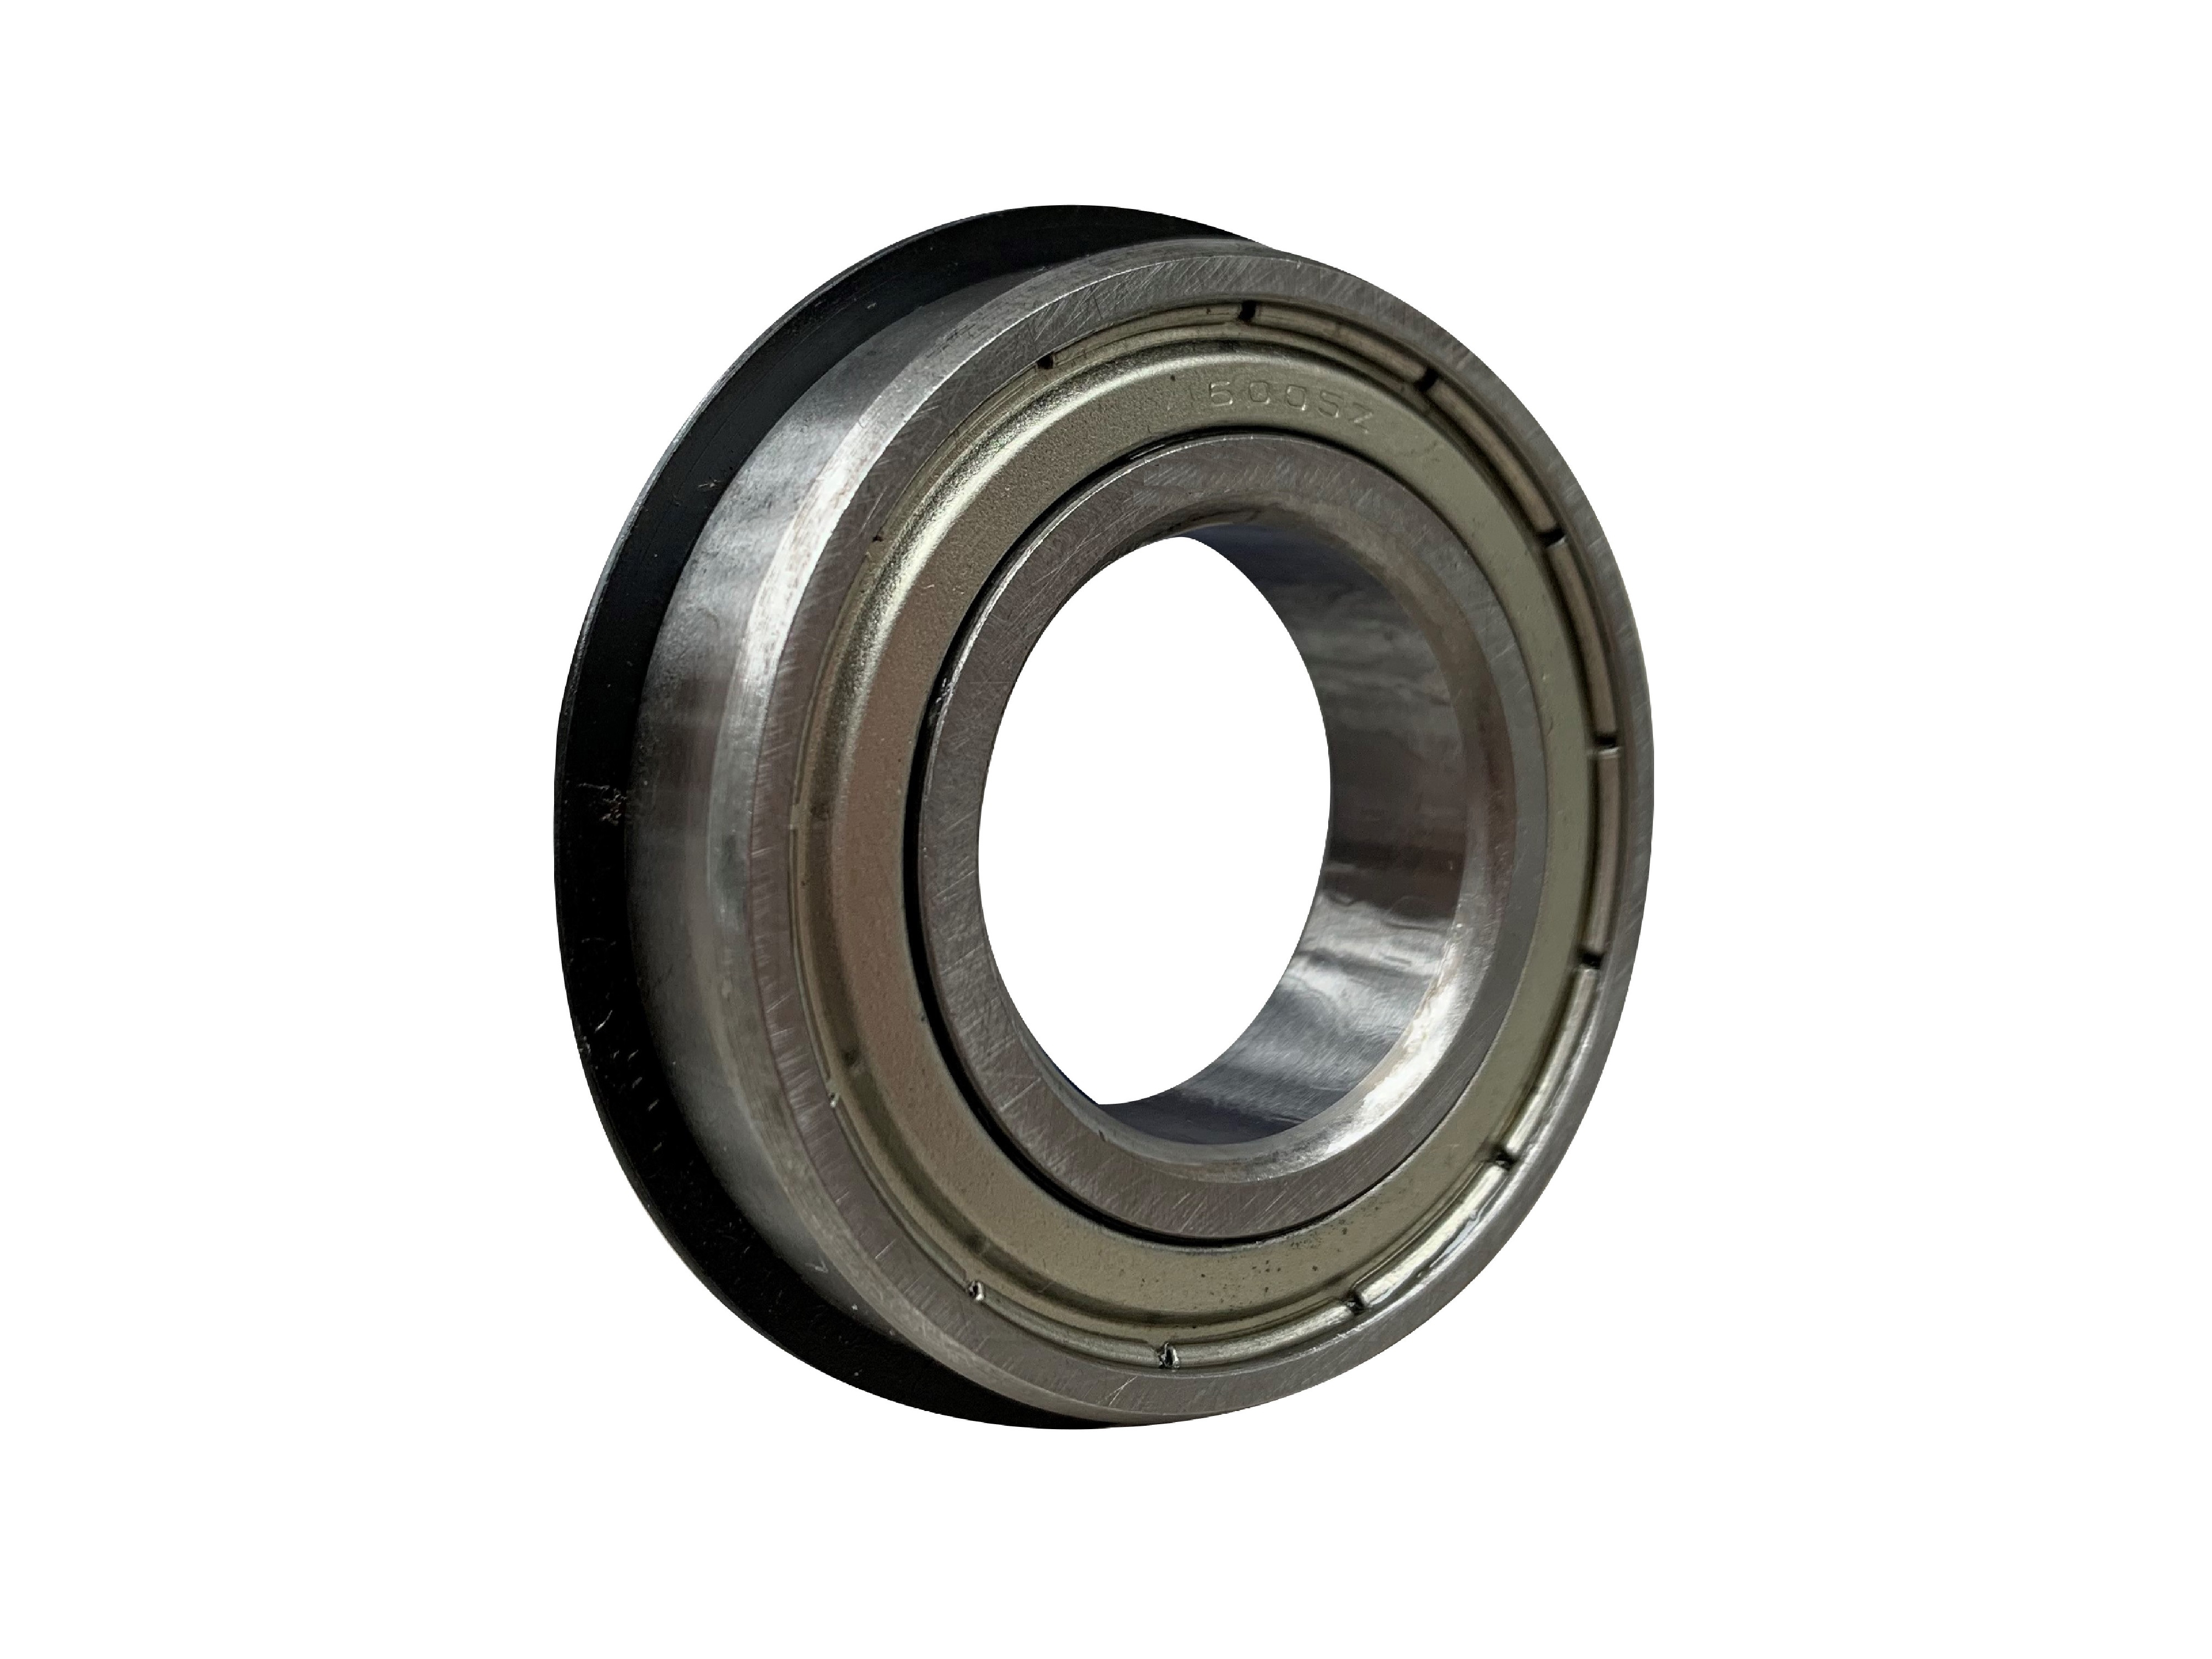 SKF 6206-2ZNR Shielded Ball Bearing With Snap Ring 30mm x 62mm x 16mm